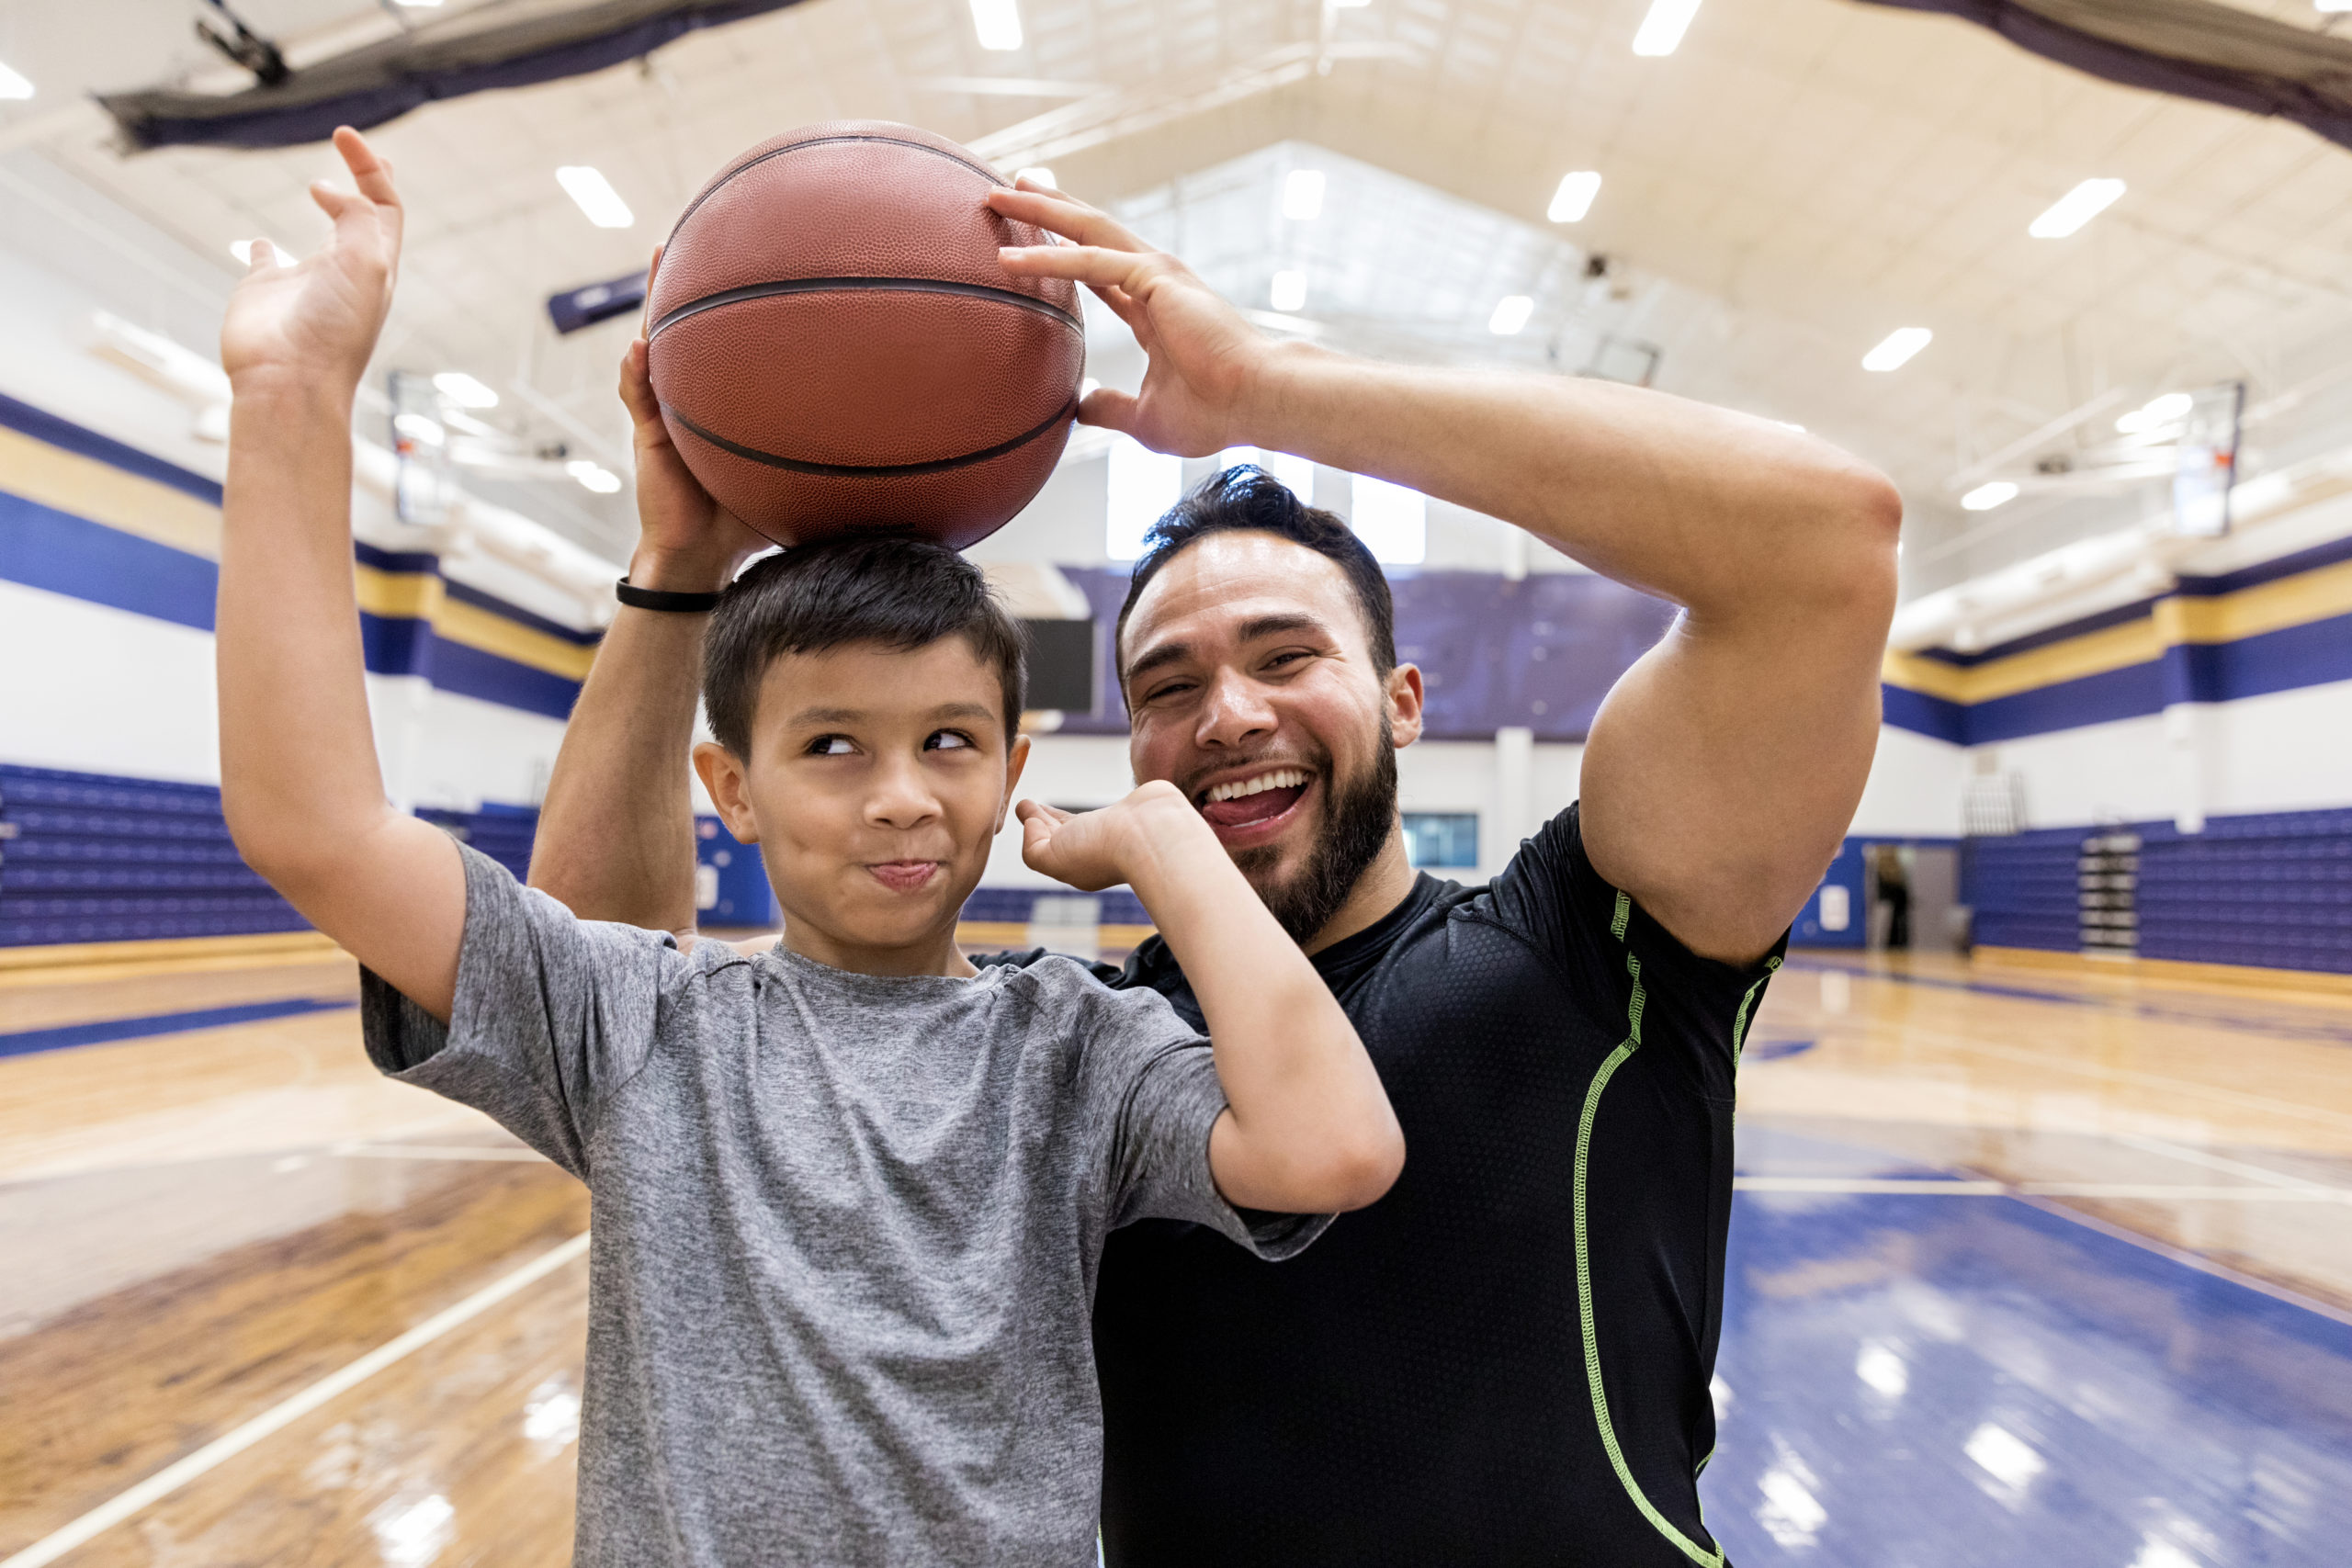 During a break from their basketball games, the mid adult father and his elementary age son goof off for the camera.